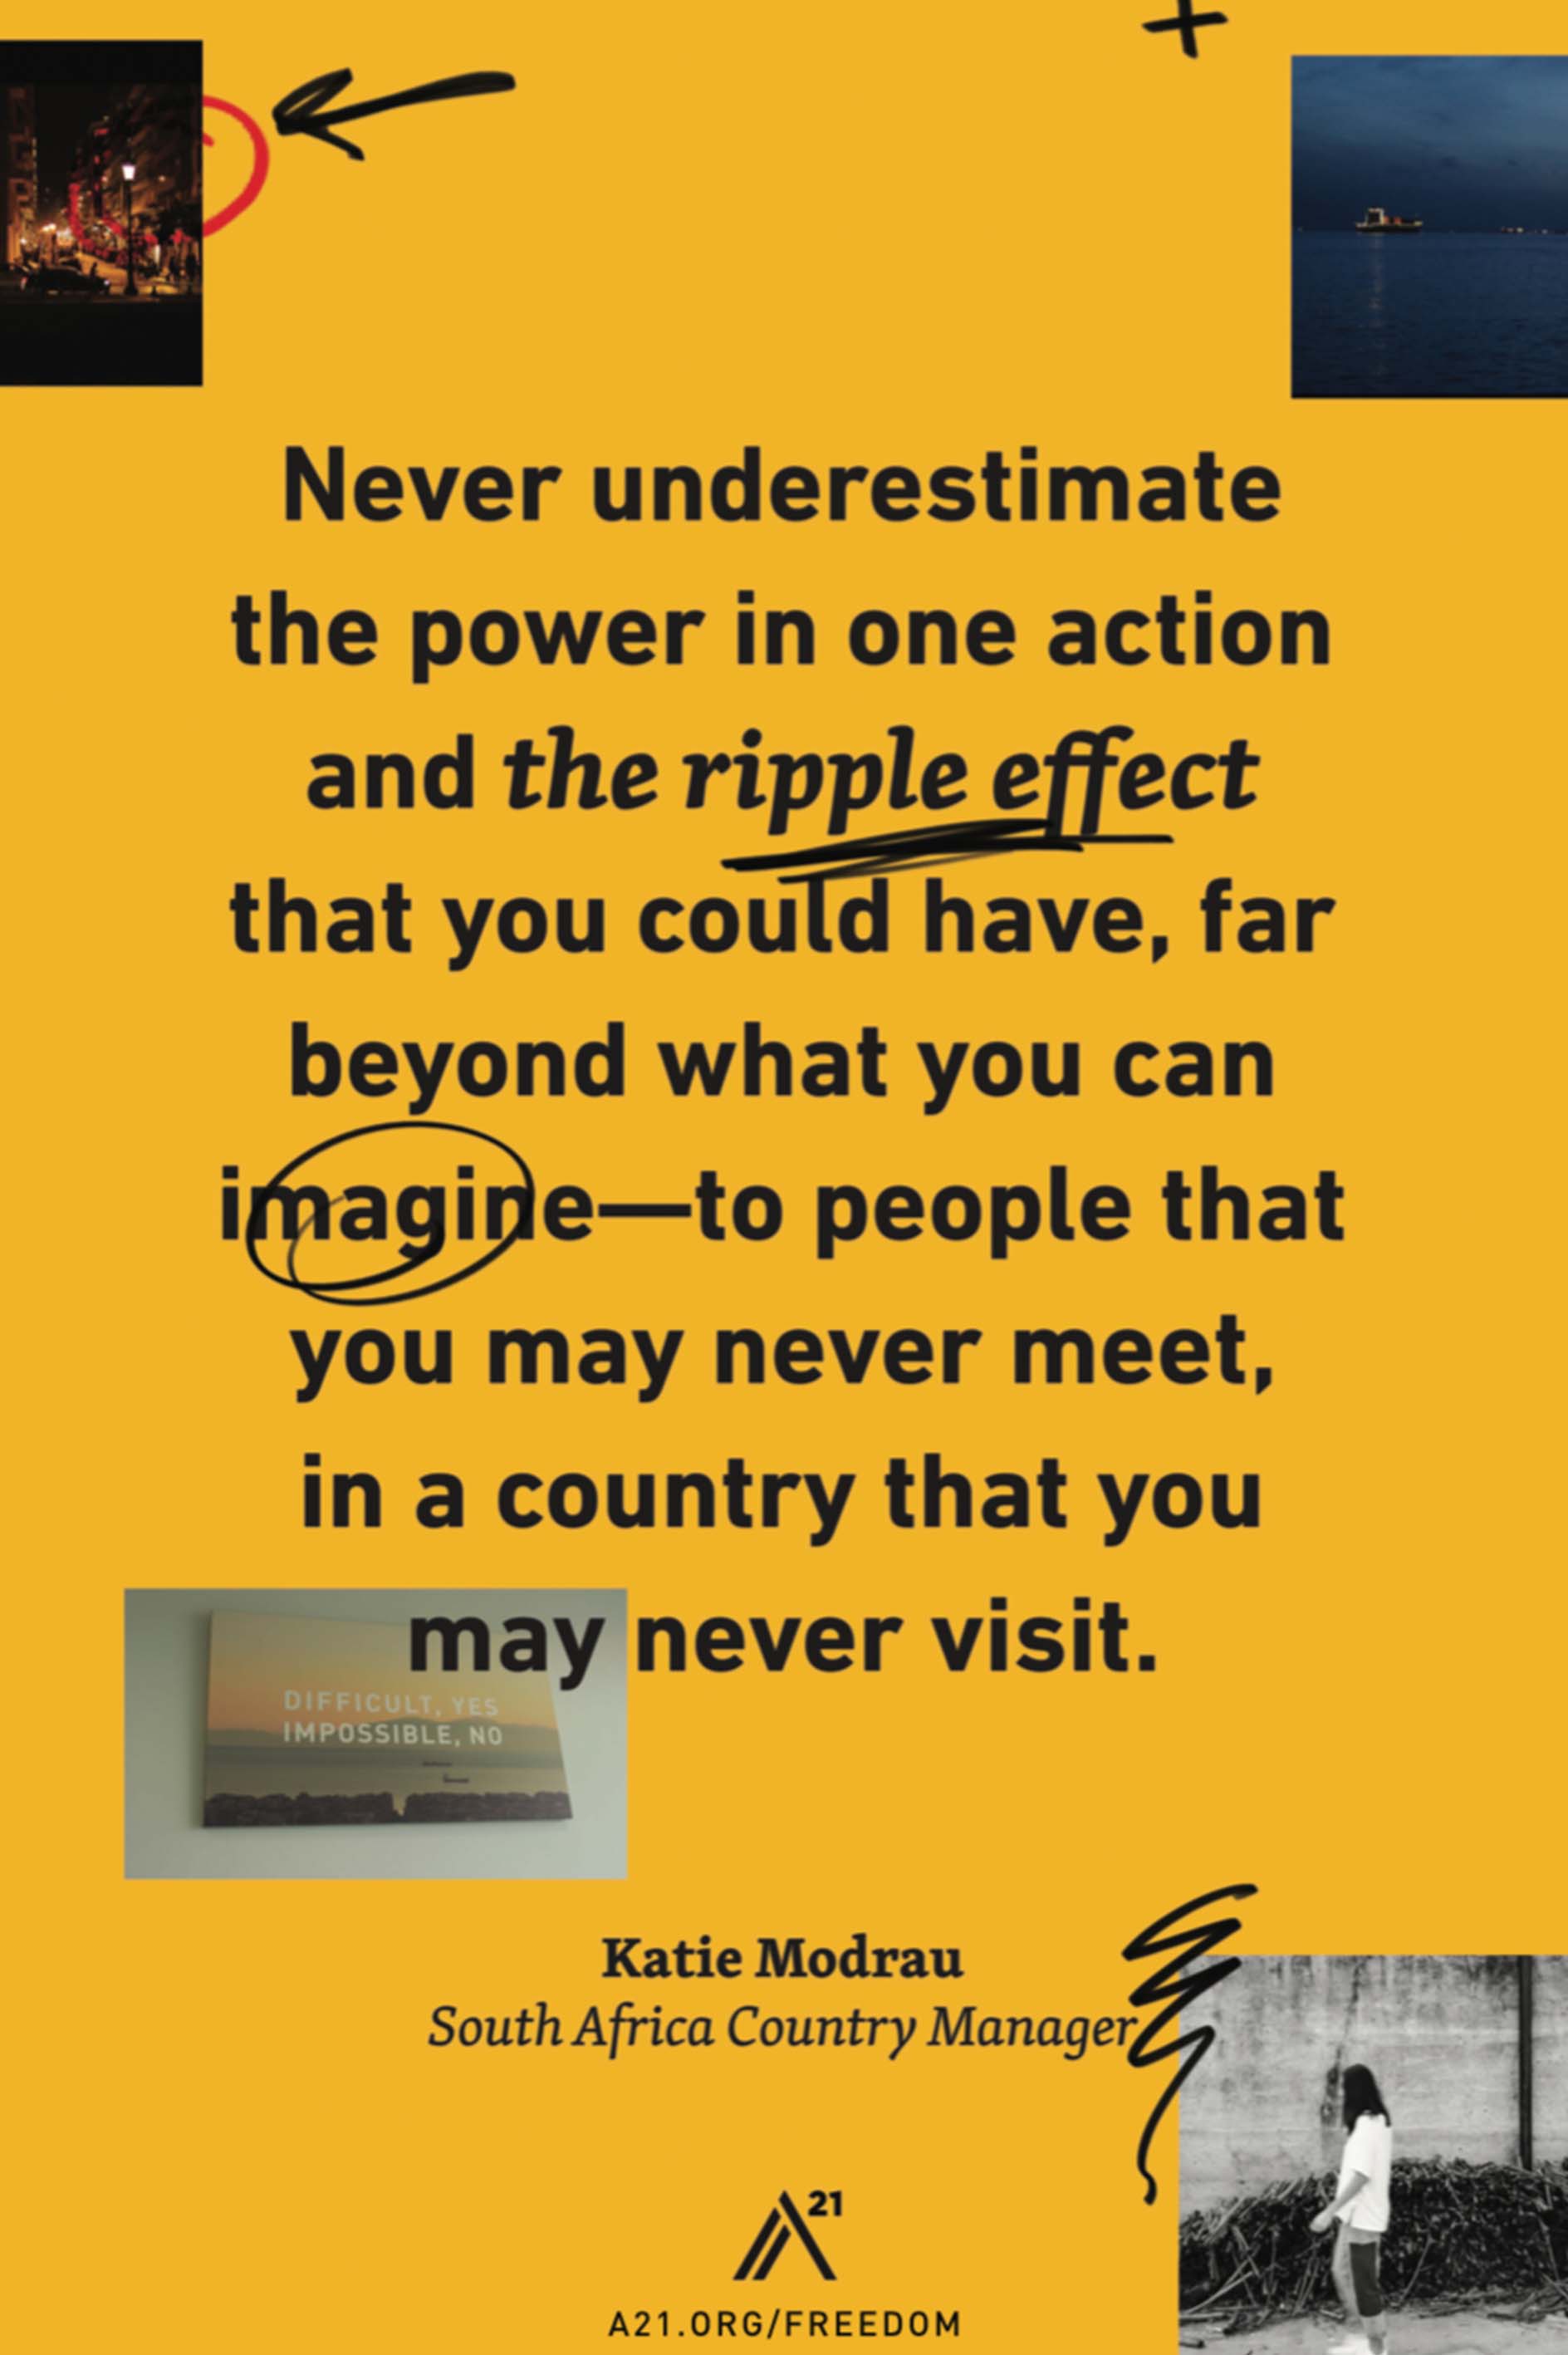 Poster 1: Never underestimate the power in one action and the ripple effect that you could have, far beyond what you can imagine–to people that you may never meet, in a country that you may never visit.